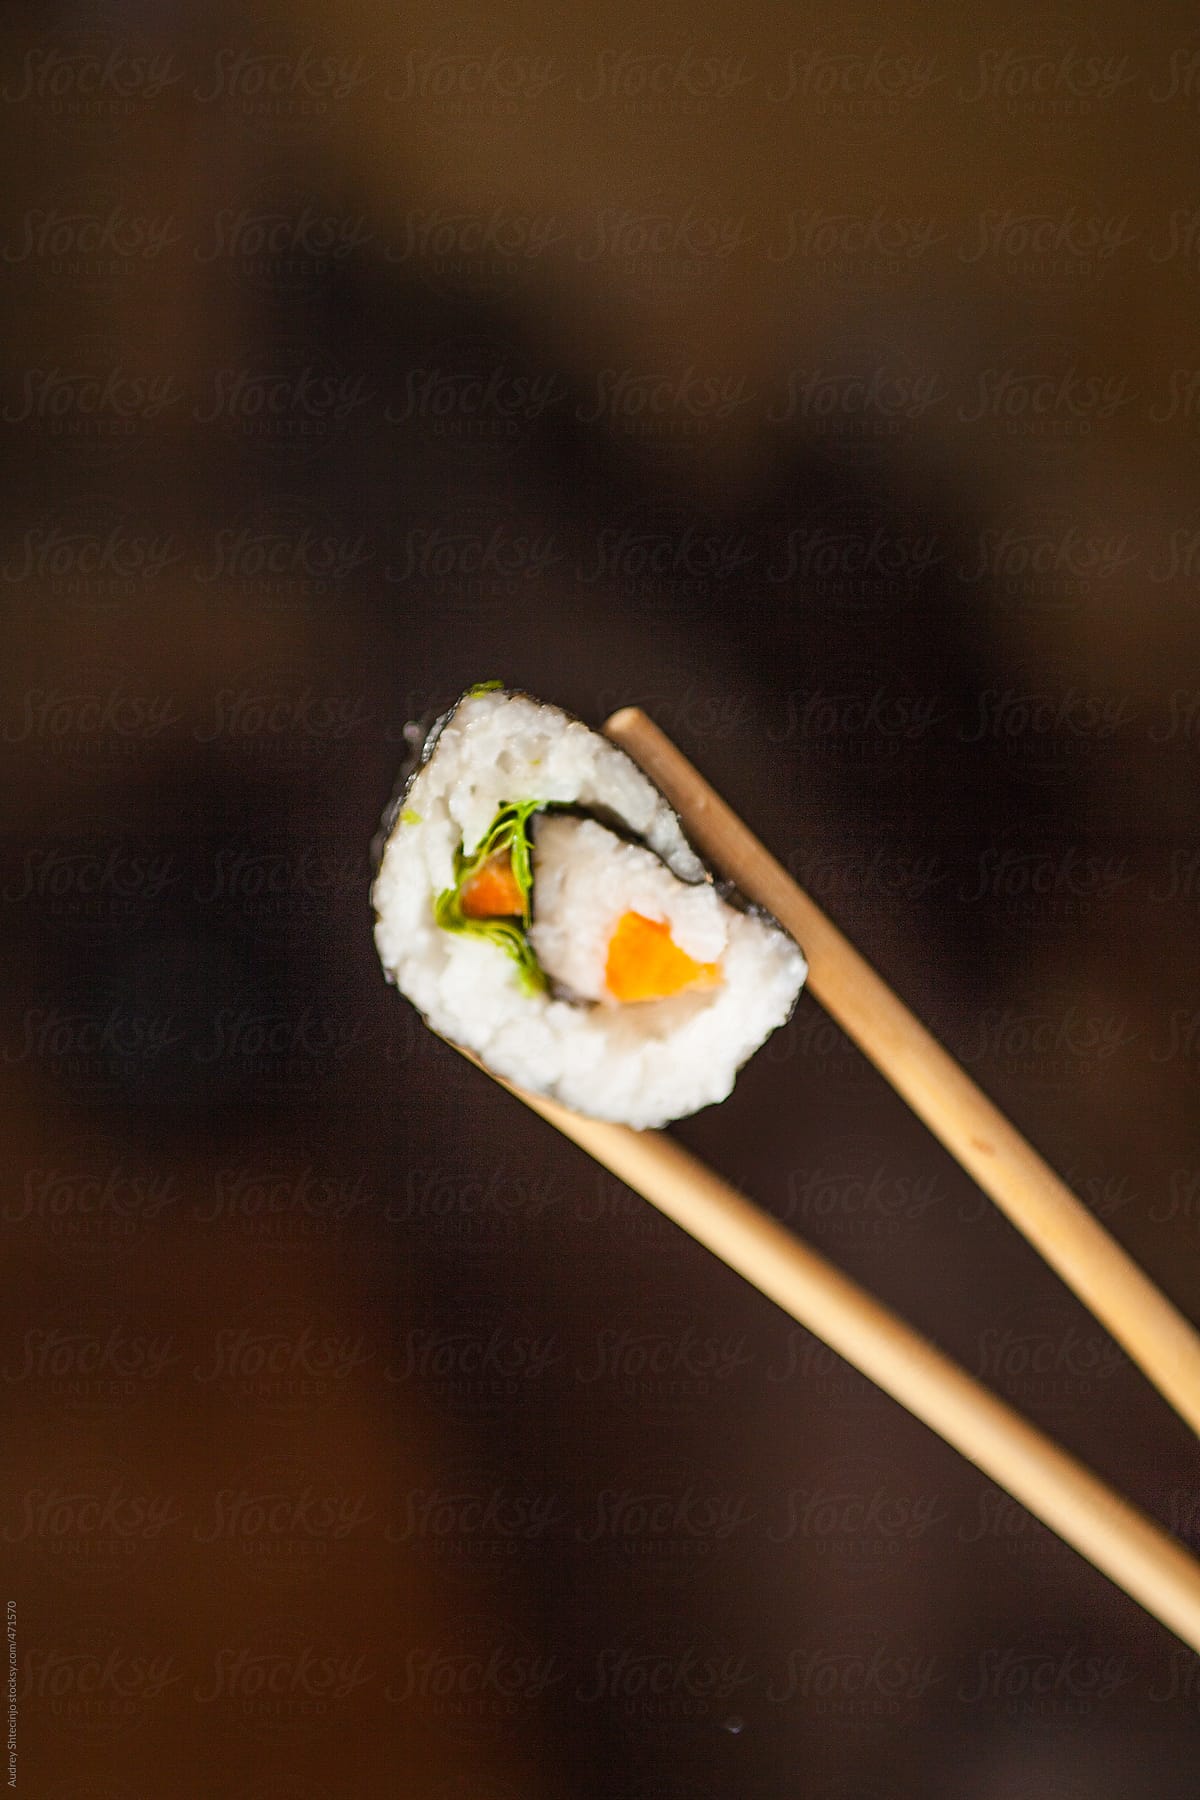 Sushi roll held with chopsticks - close up.